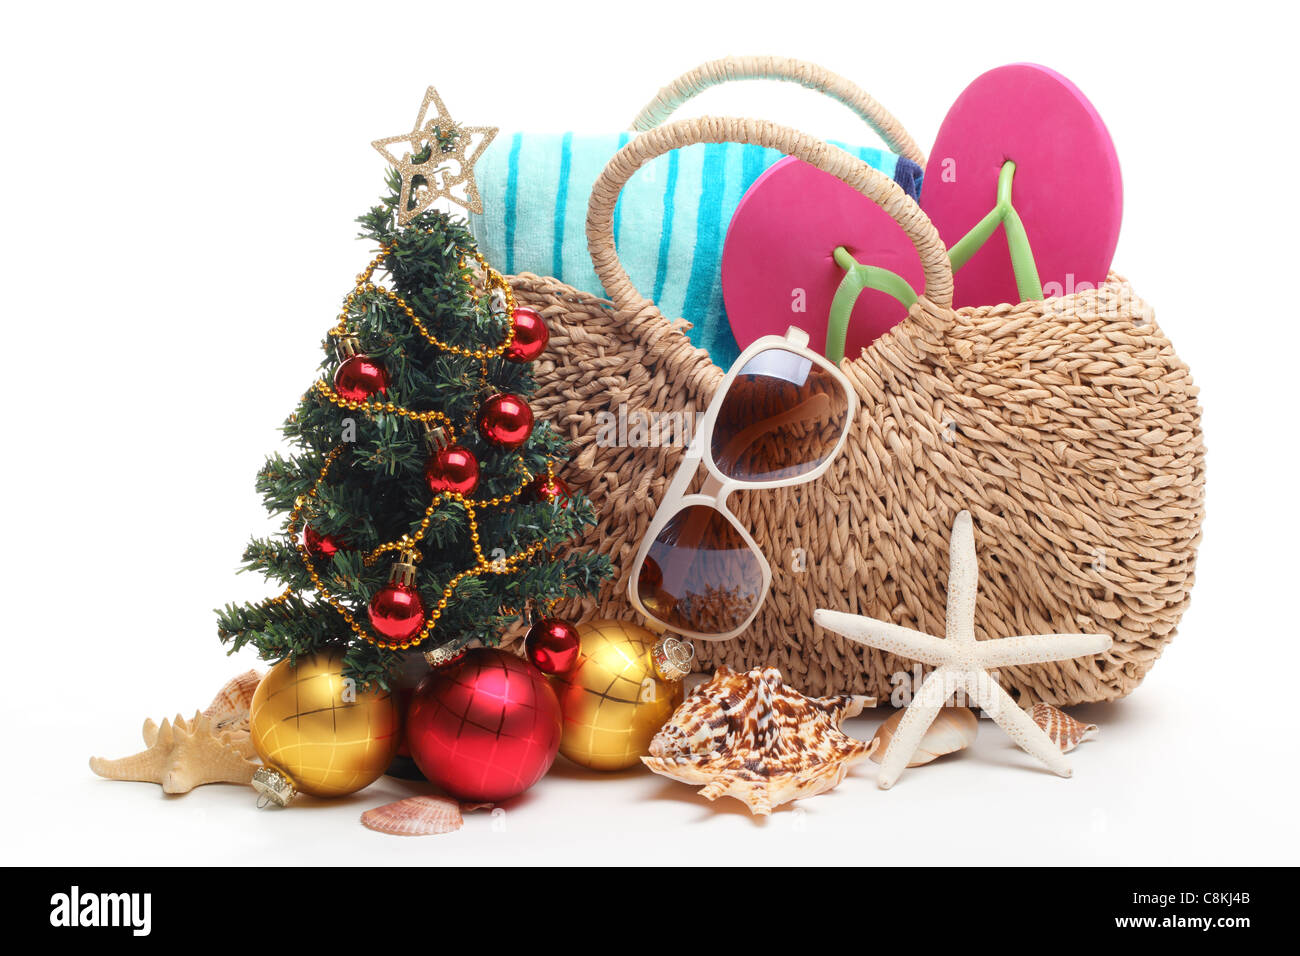 Beach accessories and Christmas tree on white background. Stock Photo